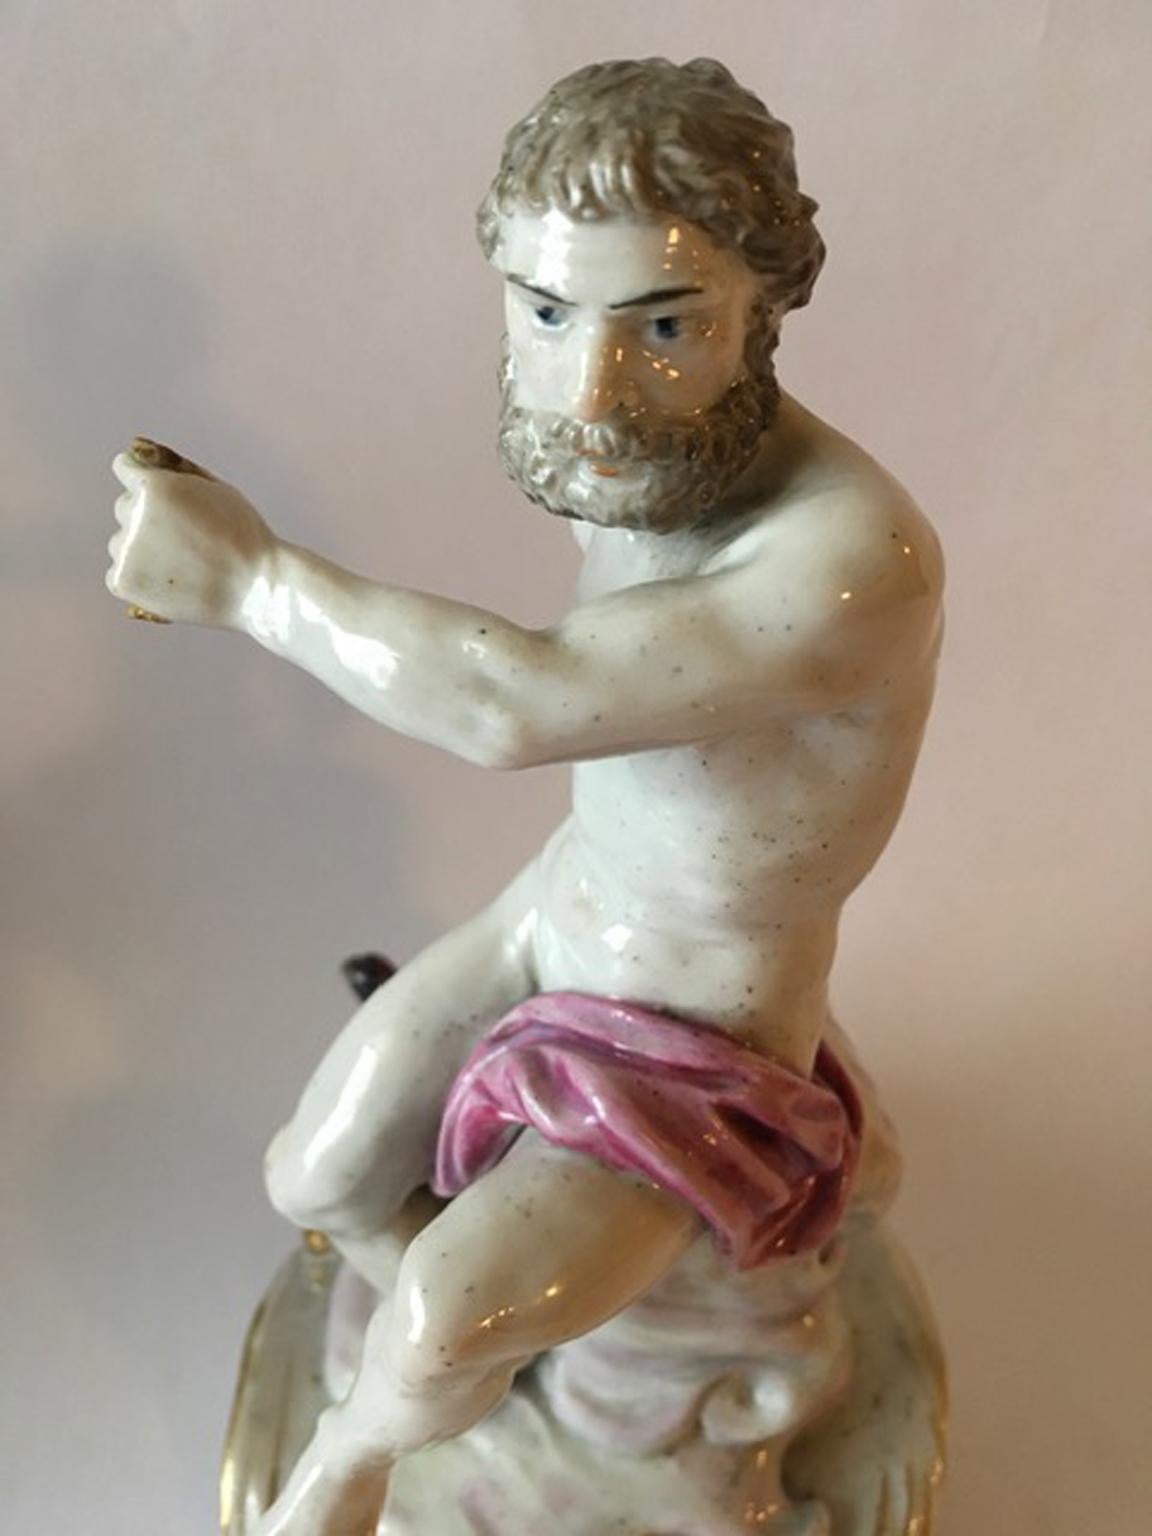 Europe 18th Century Attribuited to Meissen Porcelain Giove Figurine For Sale 1